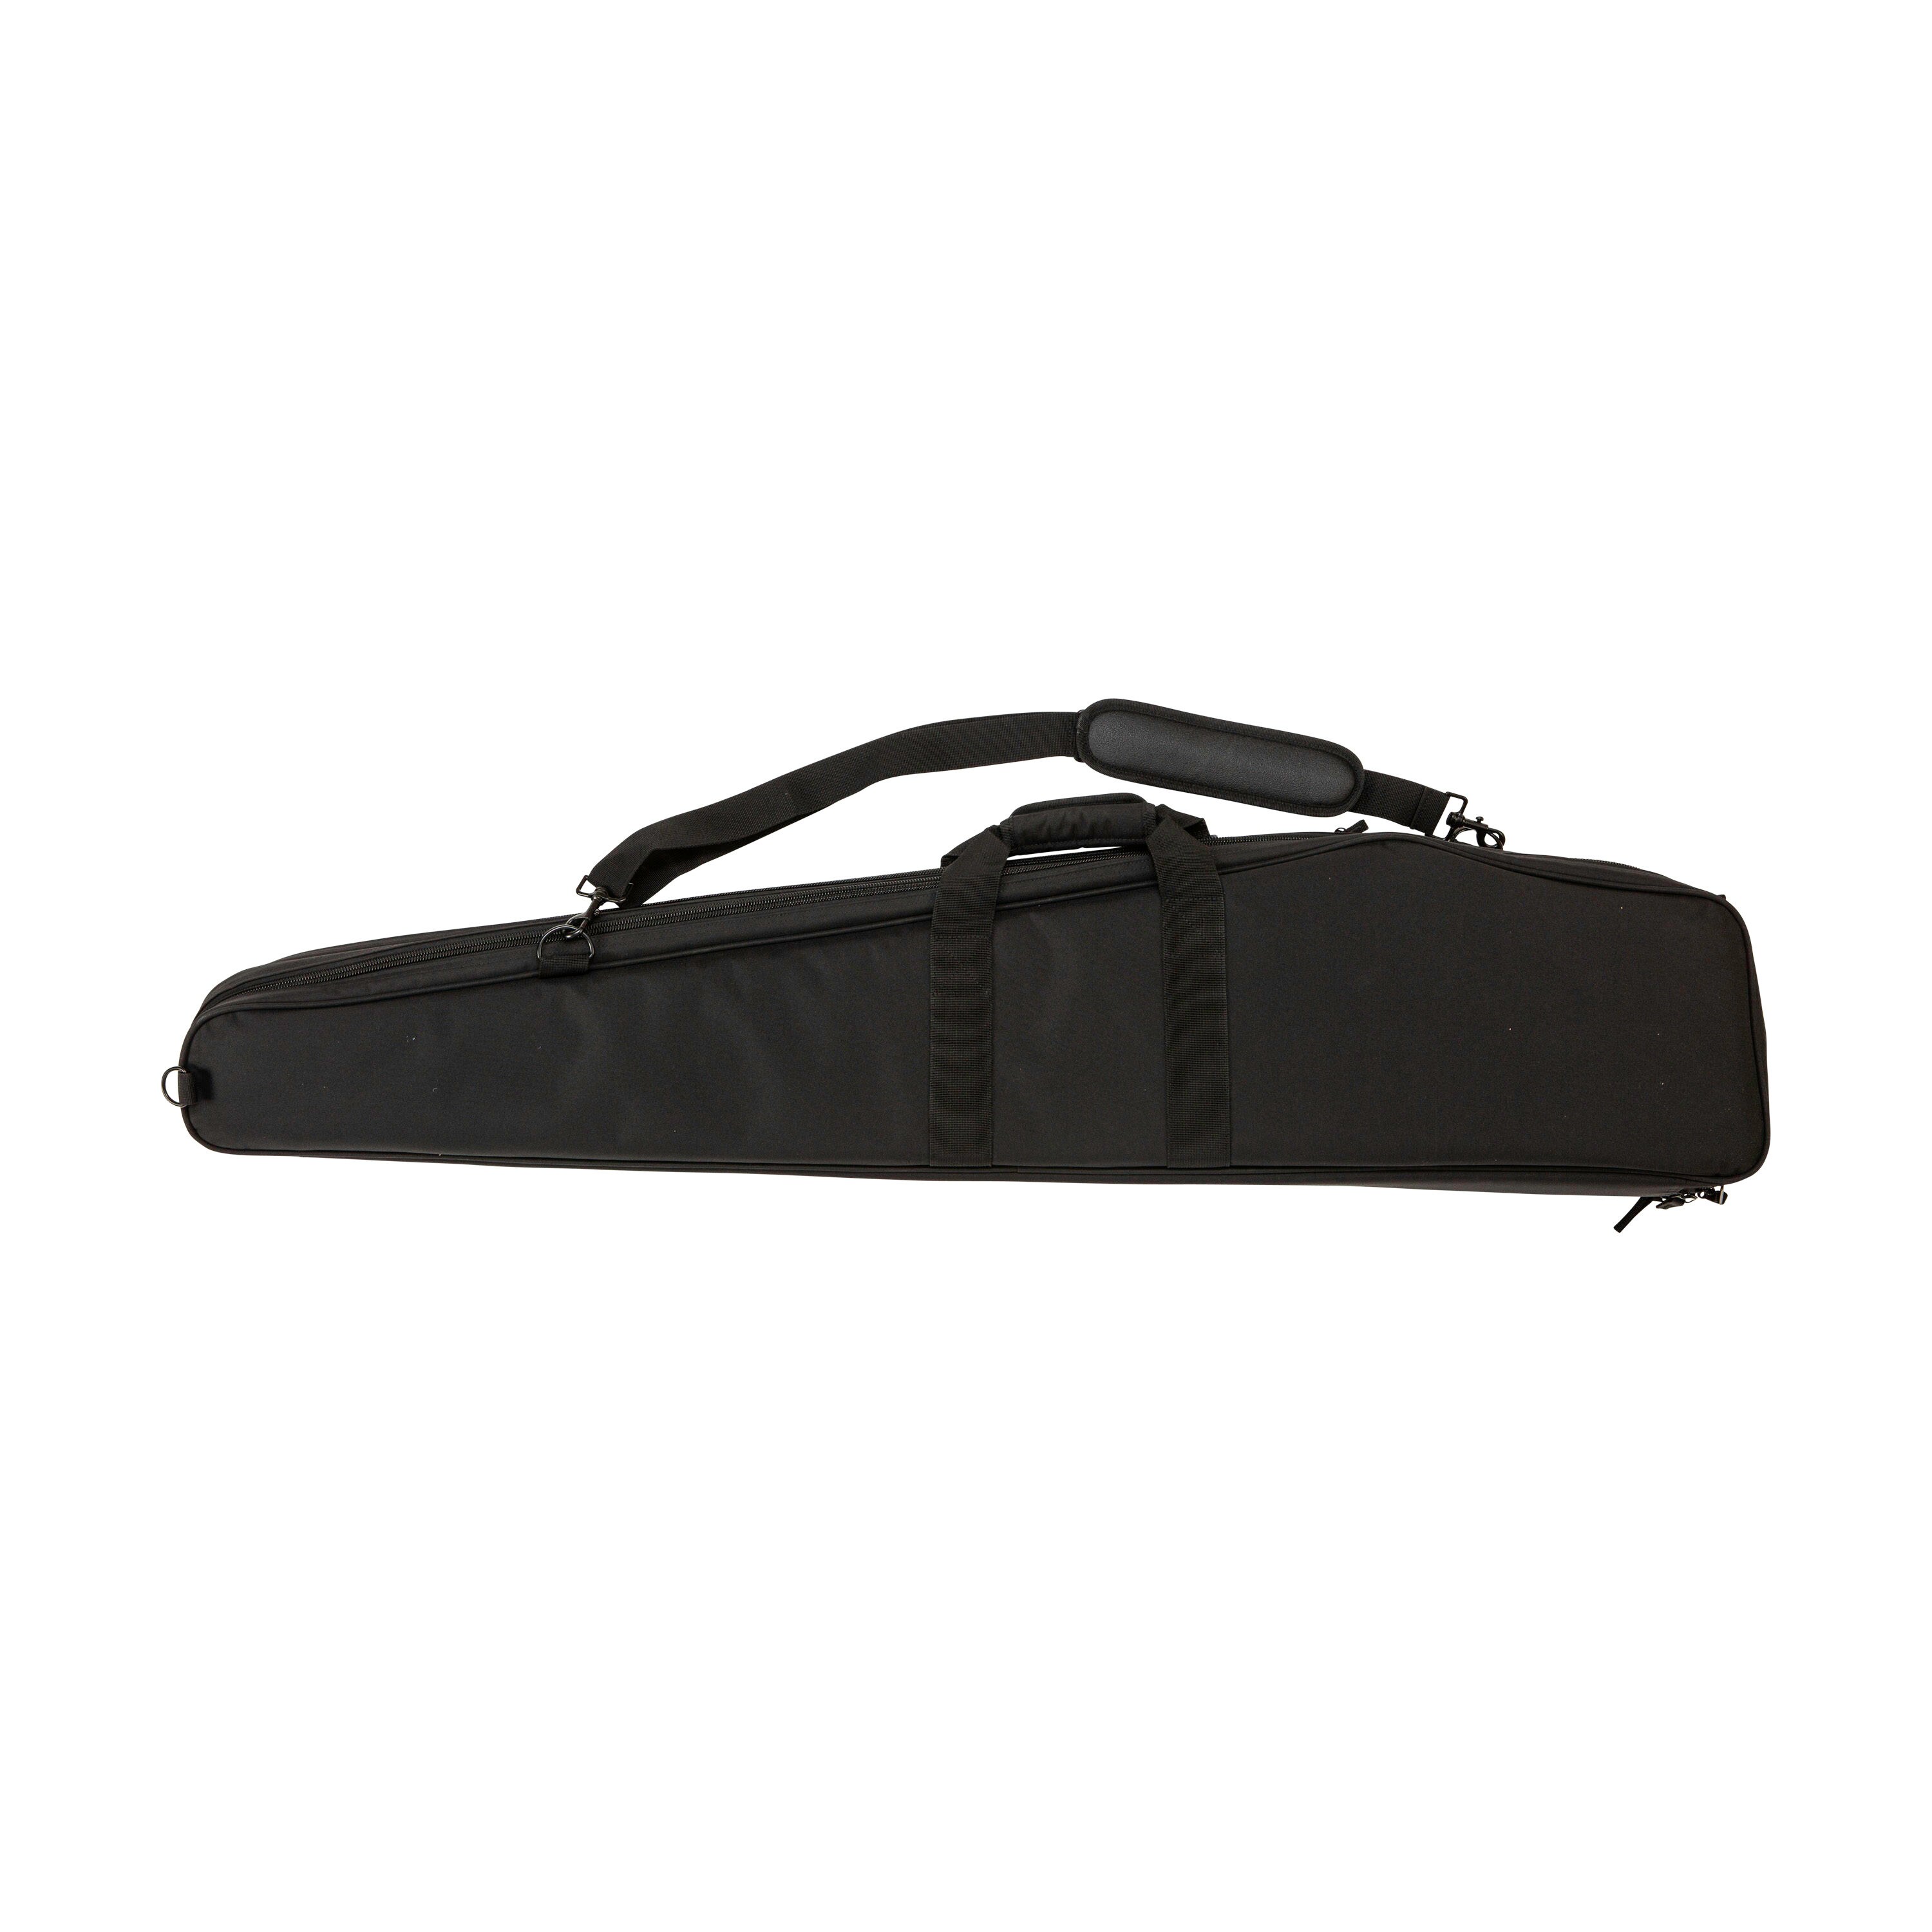 Allen Company Extra-Rugged Soft Gun Case, Daisy Chain Loops, Adjustable ...